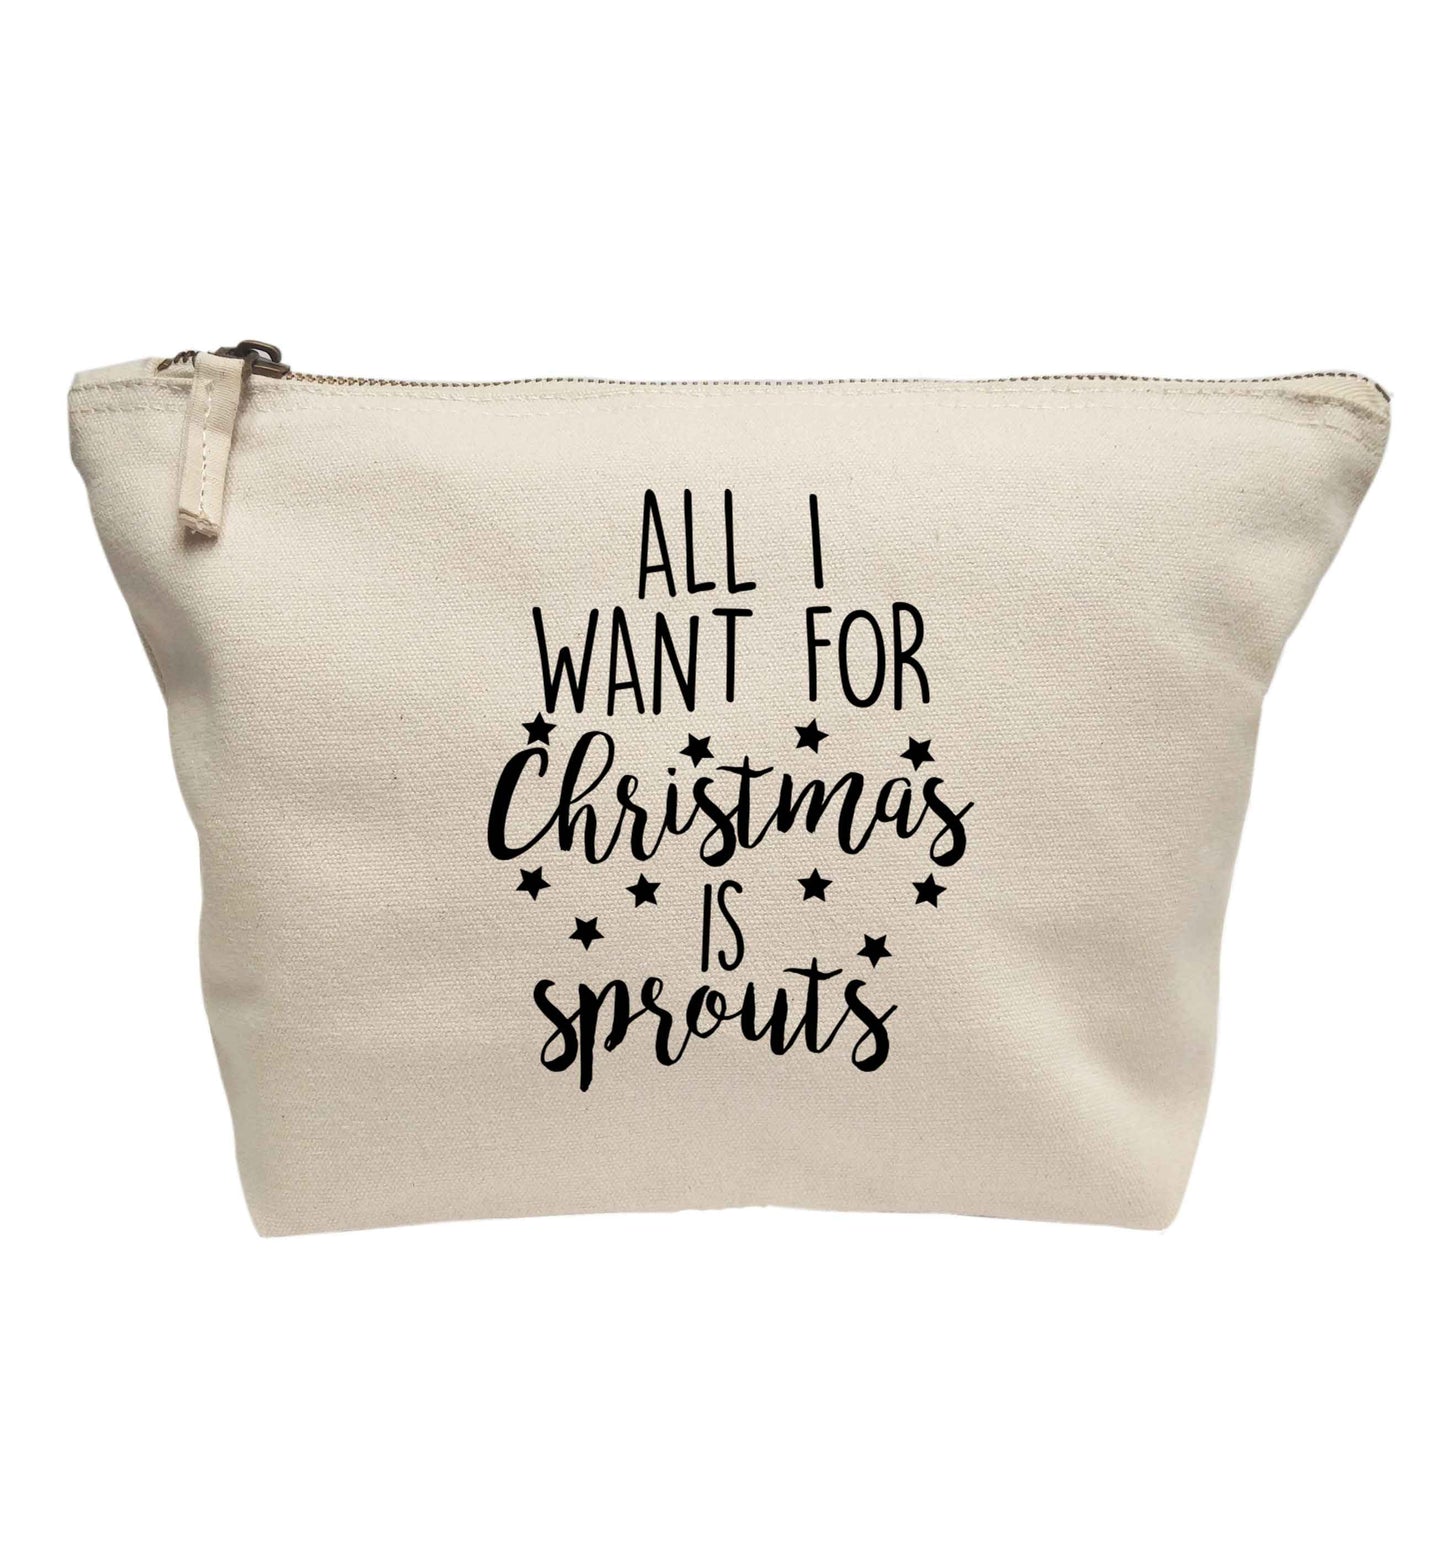 All I want for Christmas is sprouts | Makeup / wash bag